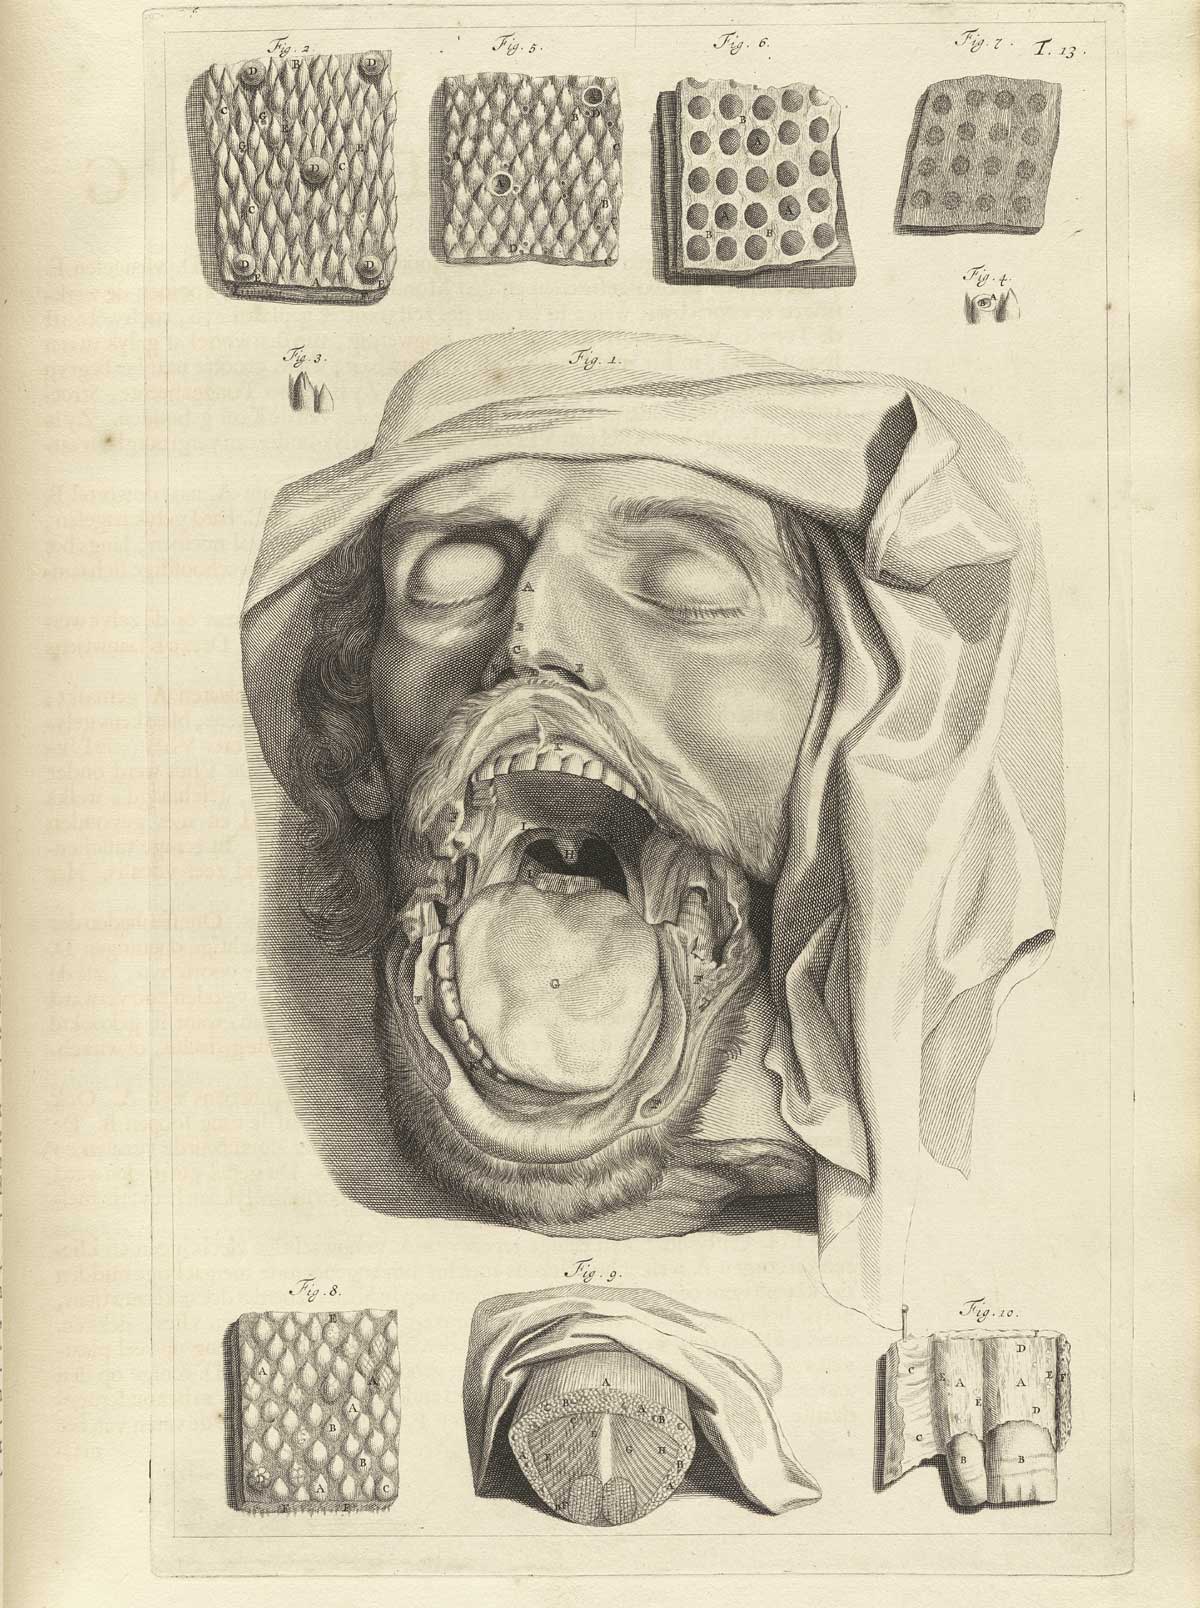 Engraving of a dissected male head with mouth wide open showing tongue, palate, and teeth and uvula, surrounded by flesh samples of the tong in cross section at bottom center and six examples of mucous membranes shown close up to capture the textures in detail; from Govard Bidloo’s Ontleding Des Menschelyken Lichaams, Amsterdam, 1690, NLM Call no. WZ 250 B5855anDu 1690.